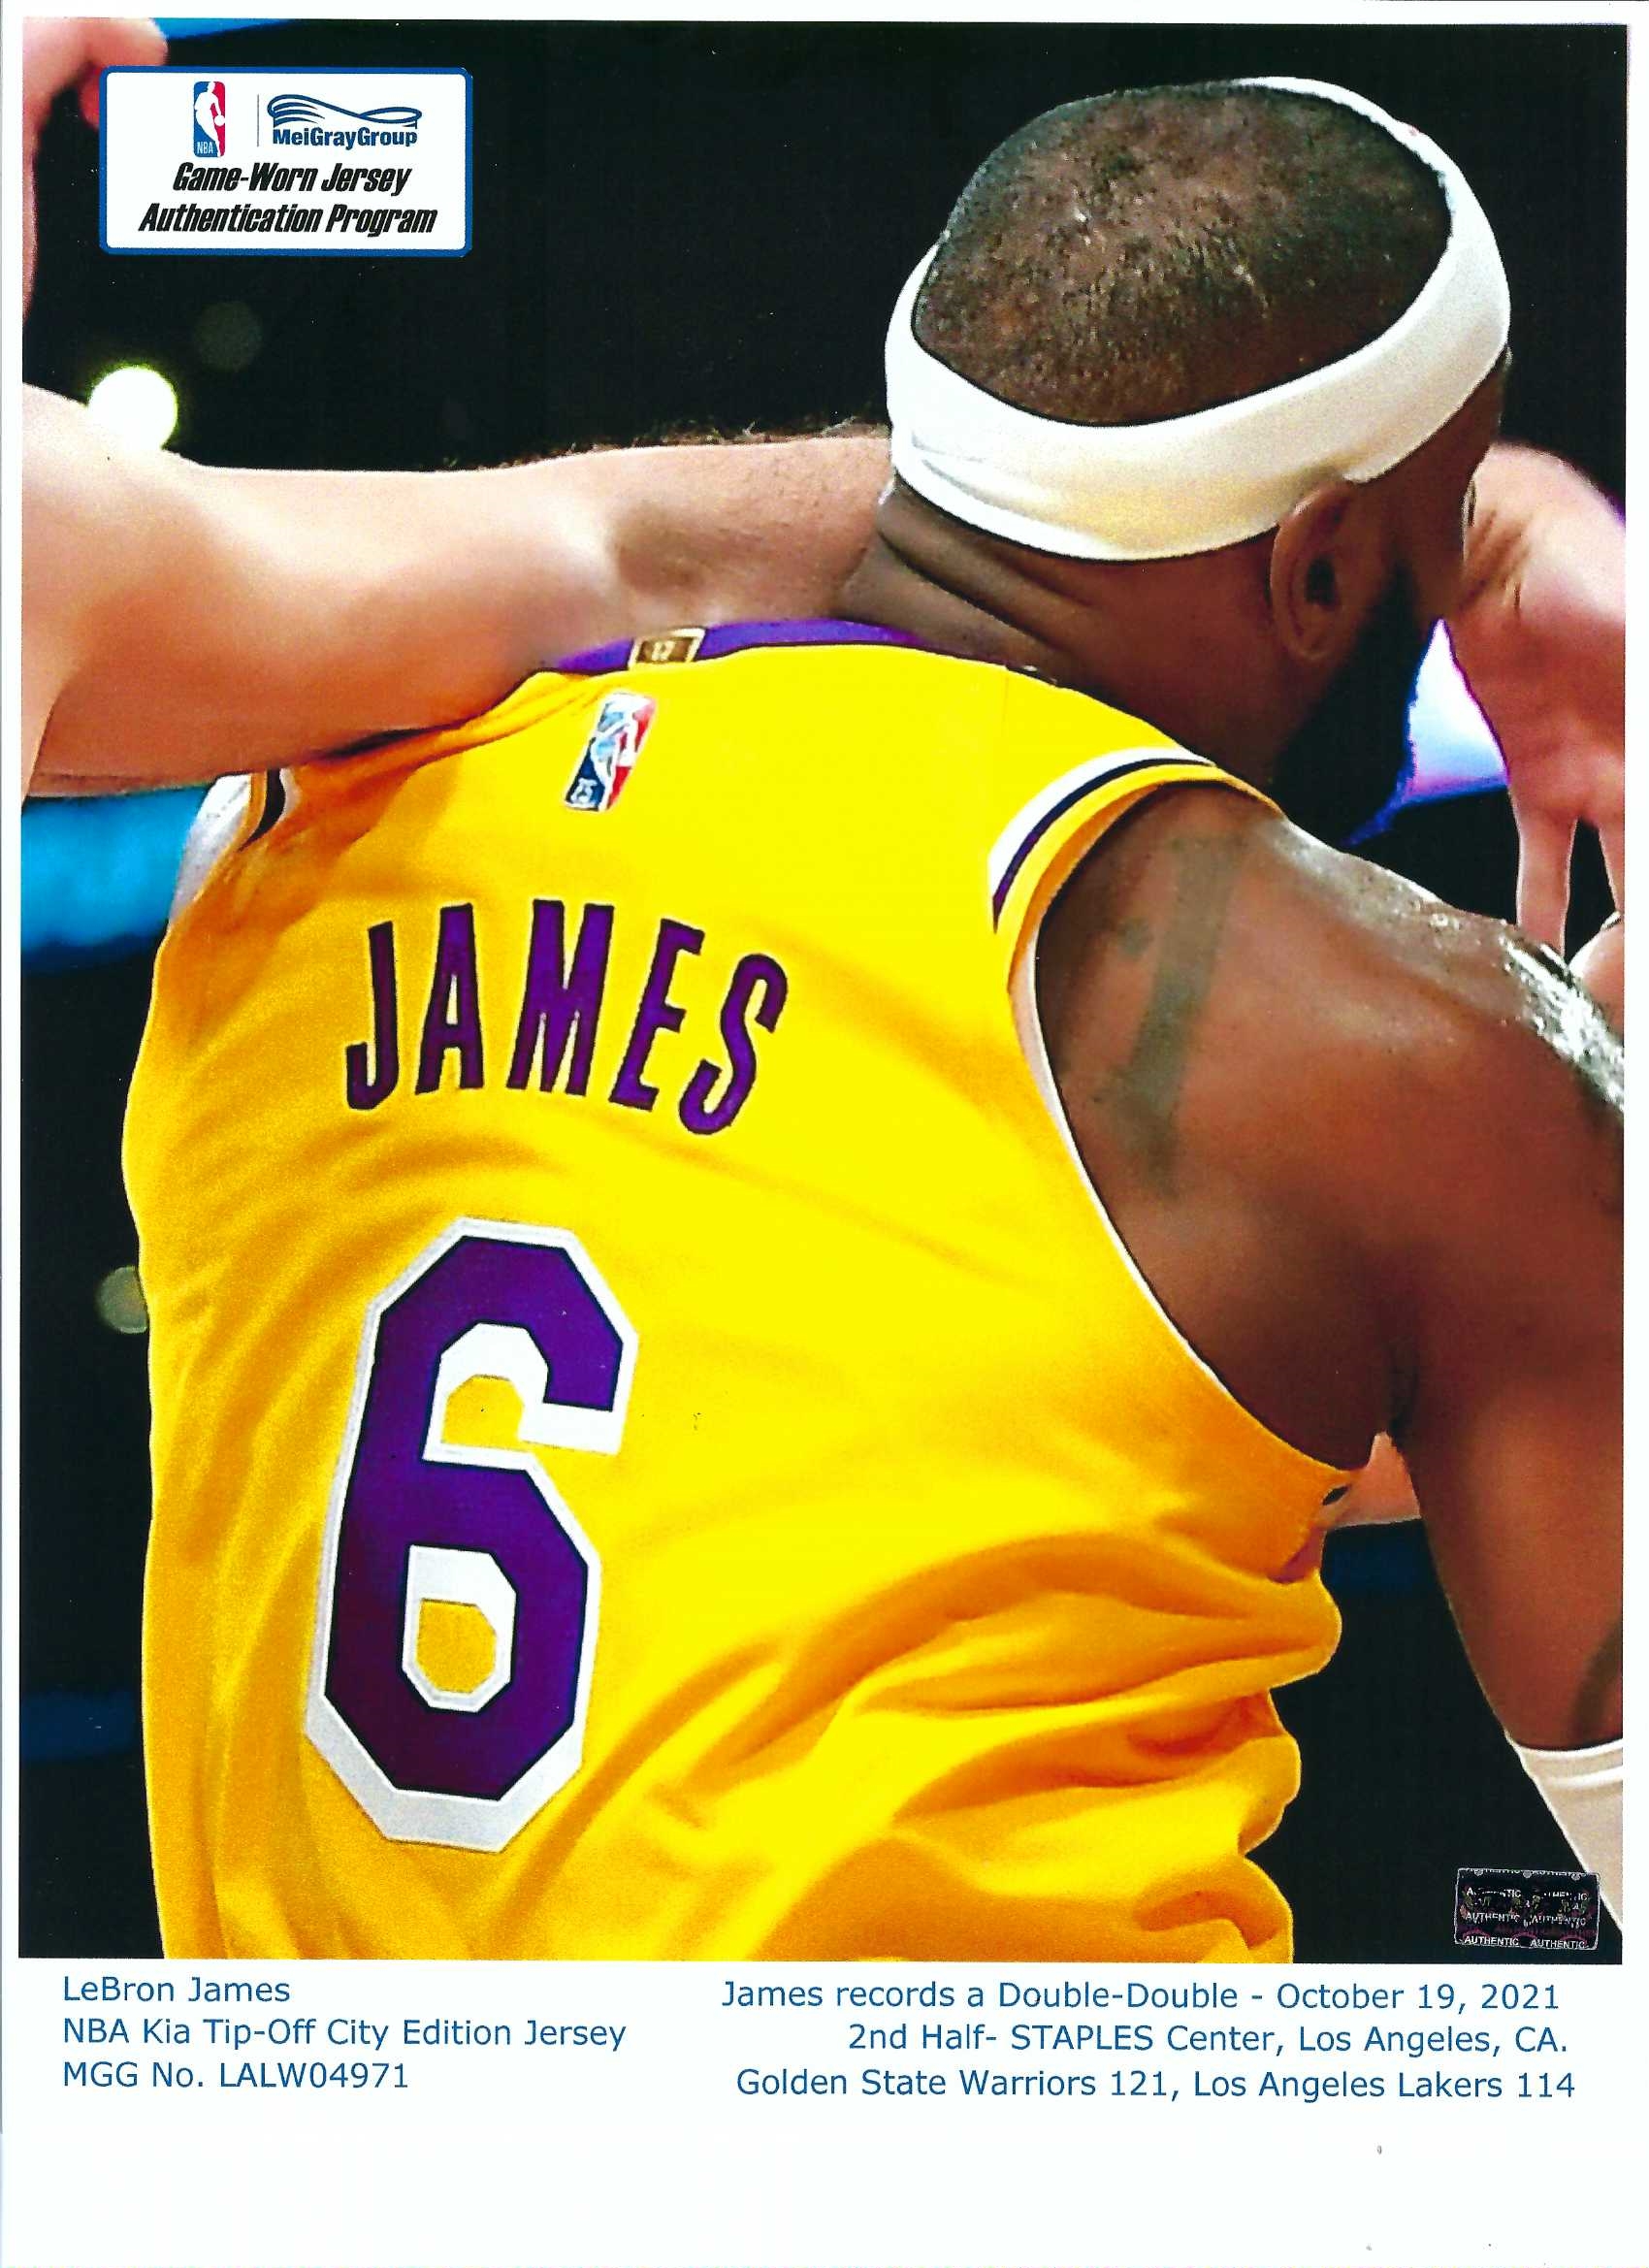 LeBron James' 1st Game-Worn Lakers No. 6 Jersey to be Sold at